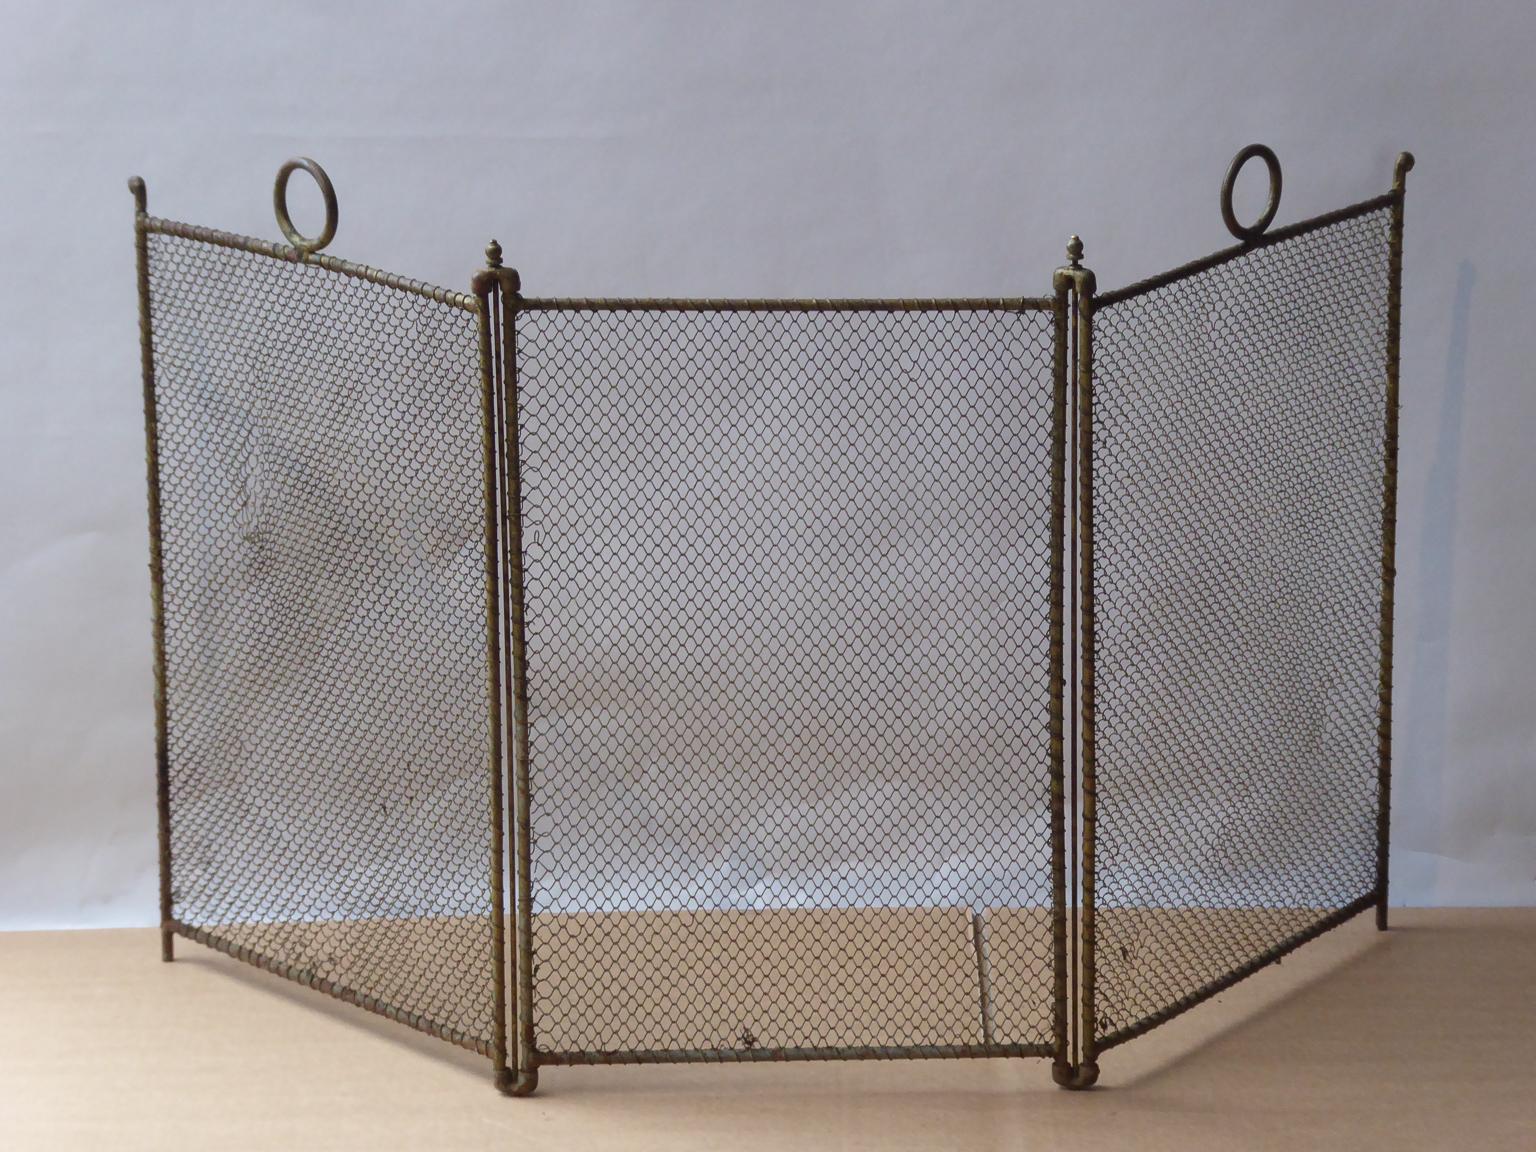 19th century French Napoleon III three panel fireplace screen. The screen is made of iron and iron mesh. It is in a good condition and is fit for use in front of the fireplace.